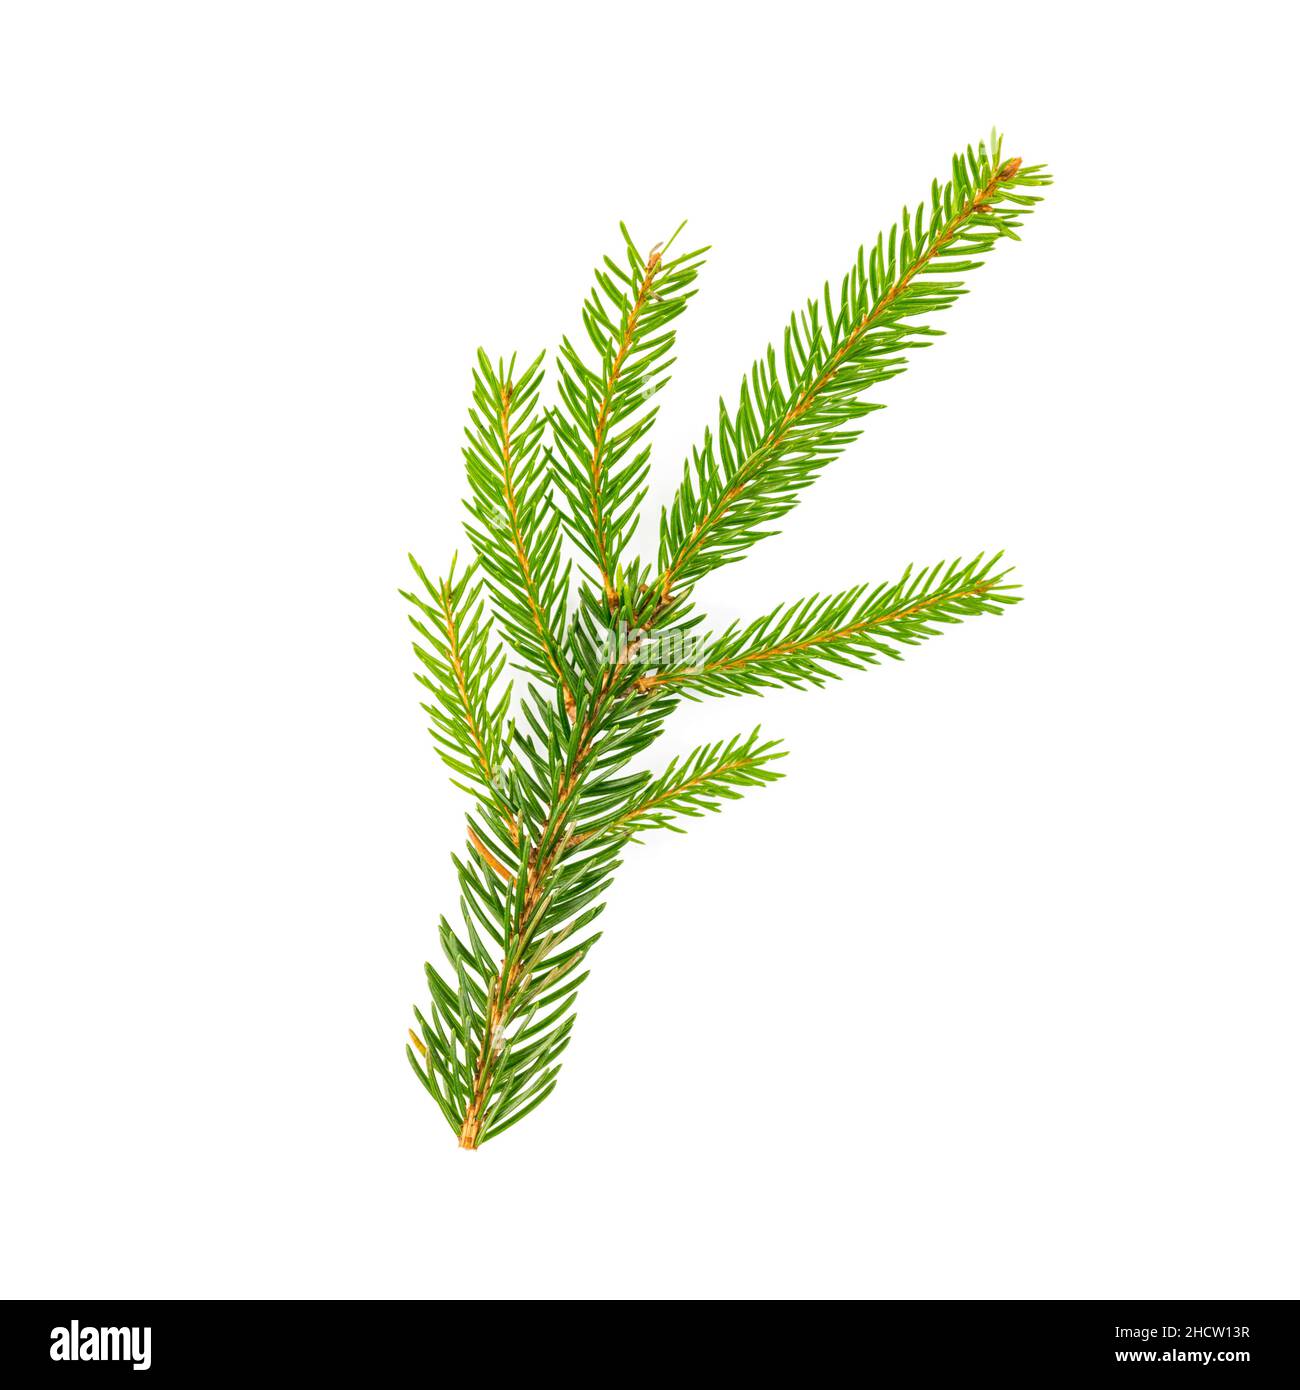 spruce fir tree branch on white background Stock Photo